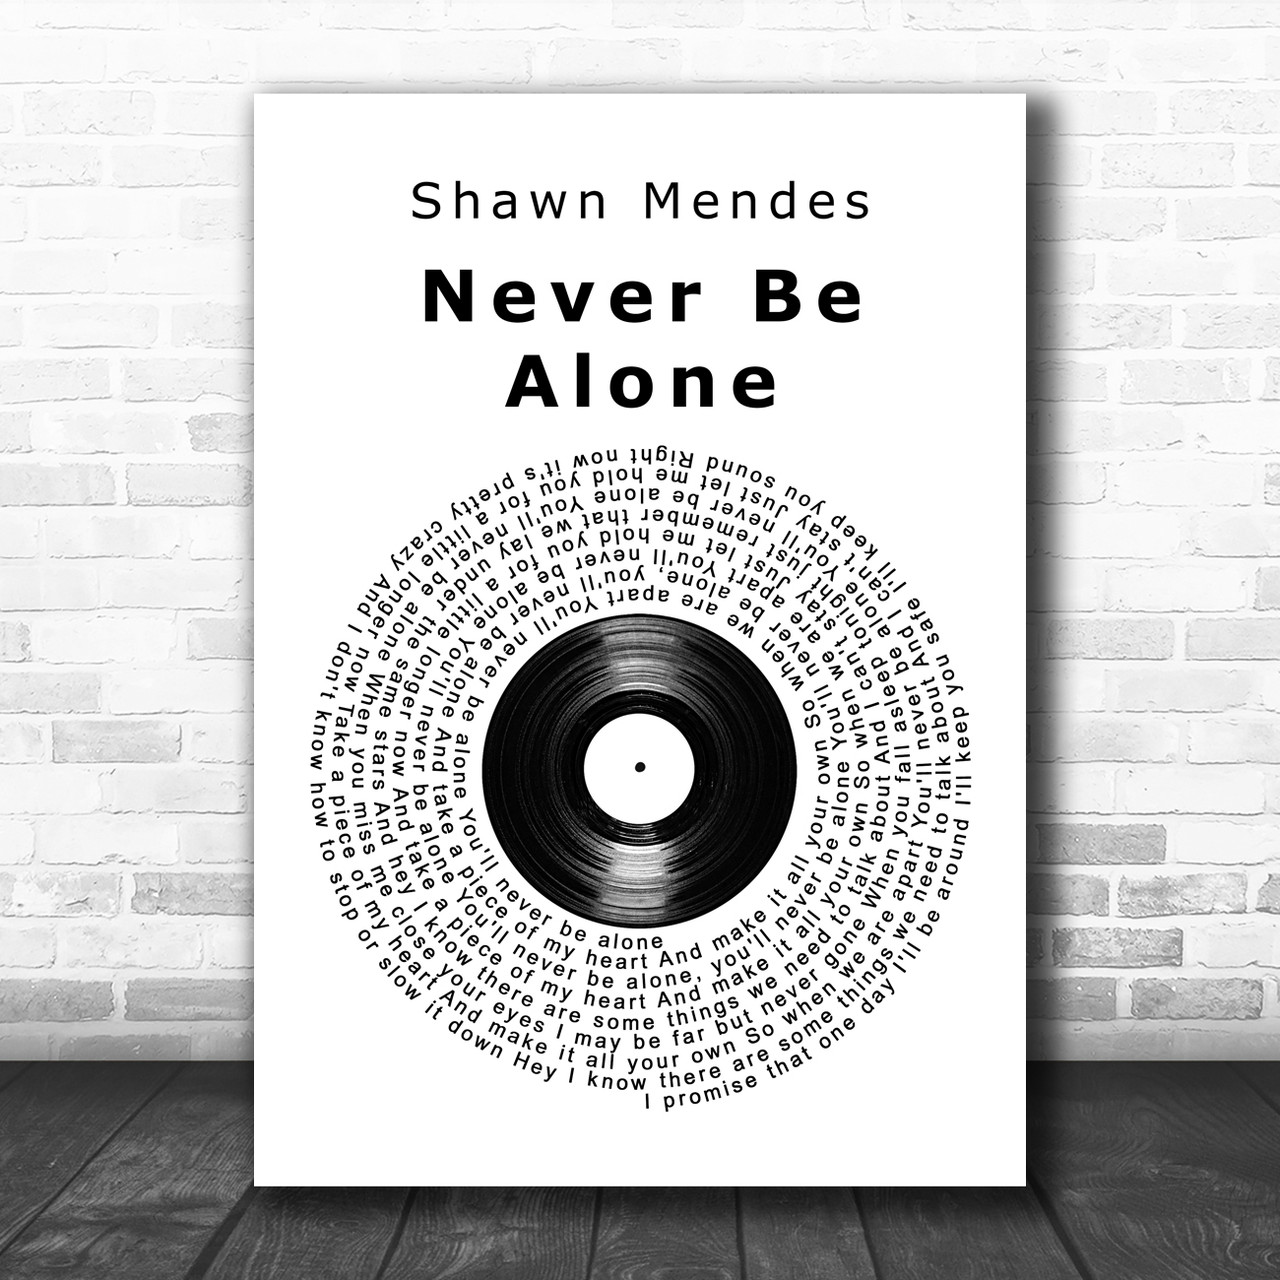 Never Be Alone, Shawn Mendes